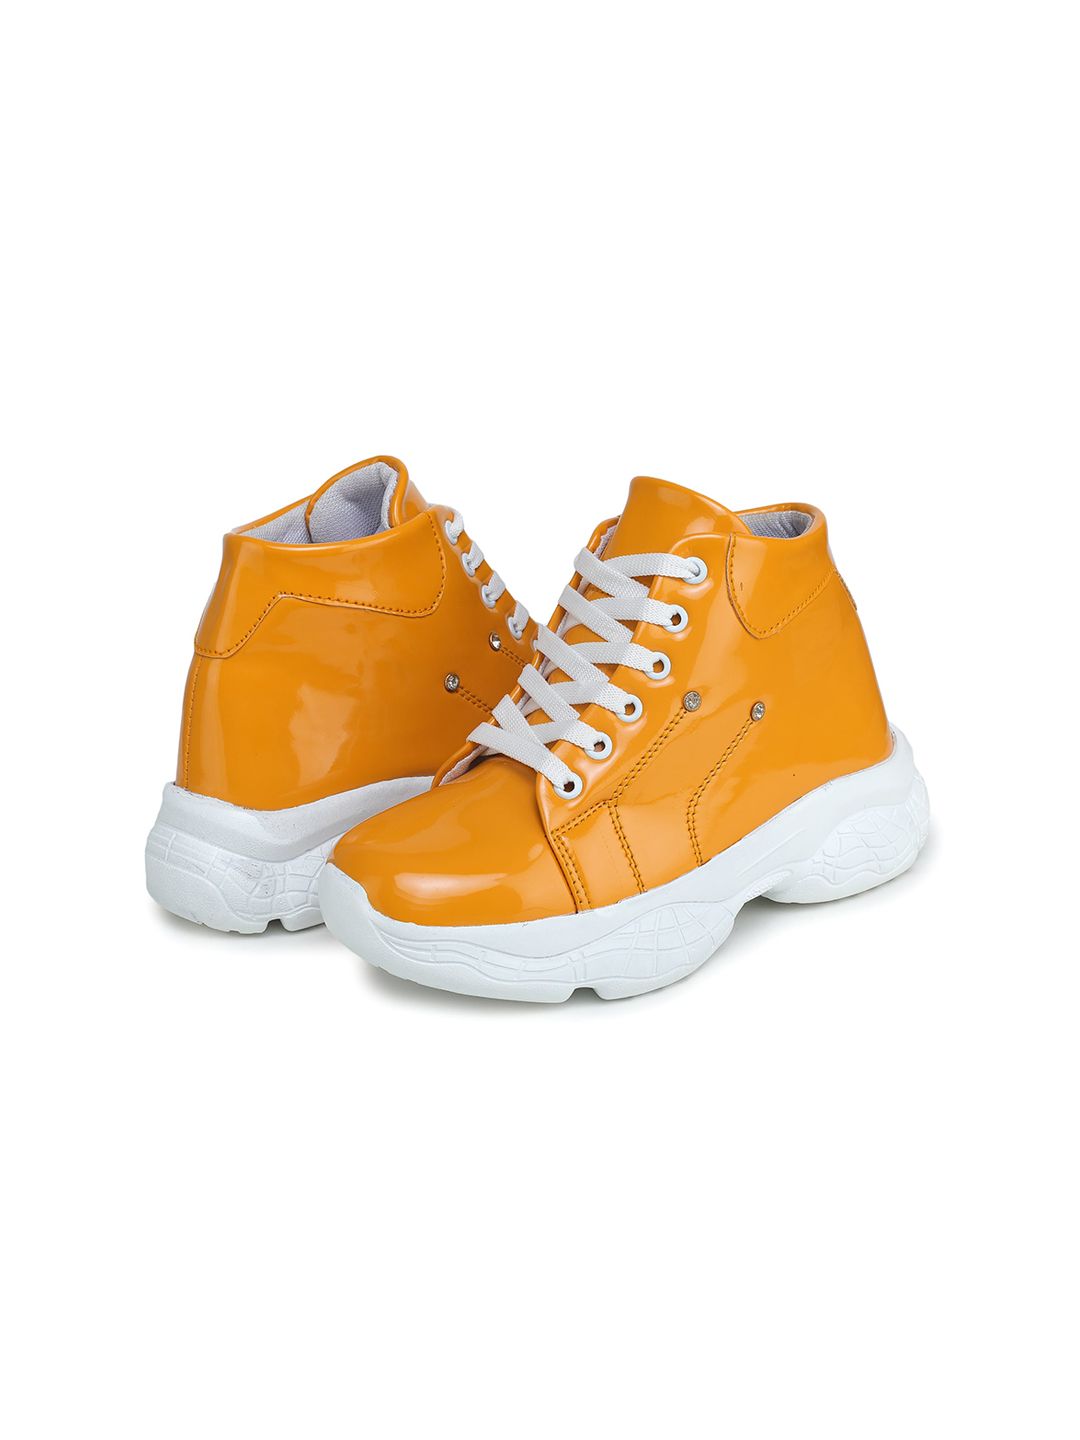 BOOTCO Women Yellow Lace-Up Mid-Top Sneakers Price in India